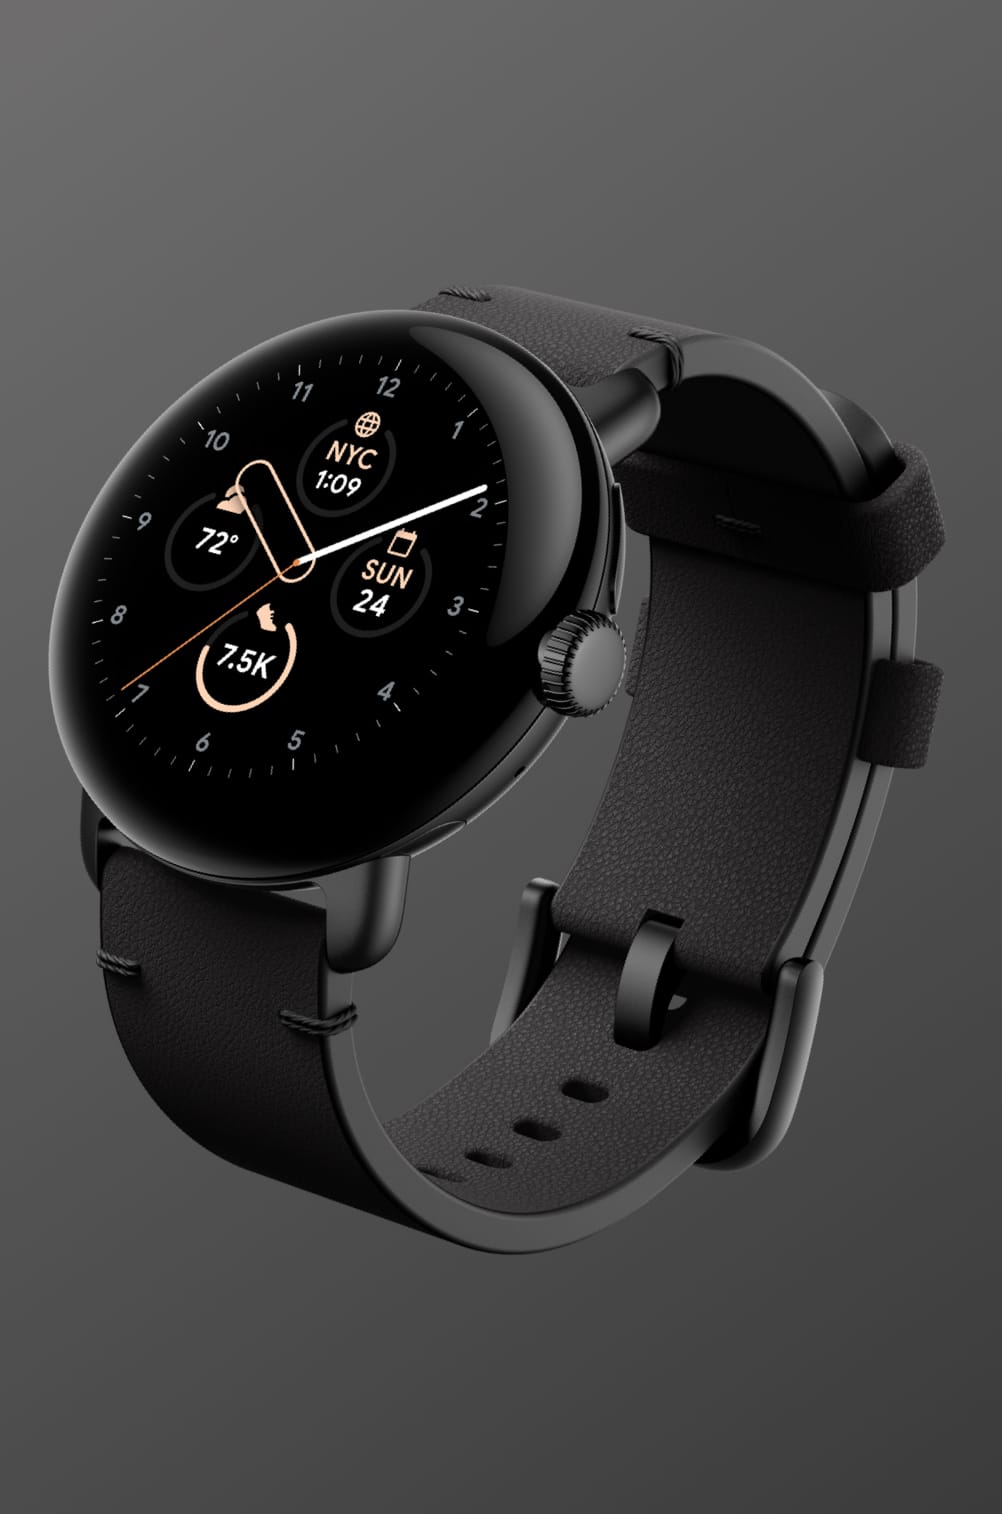 Shop Accessory Smartwatch Accessories Google Google Leather Pixel and Watch Pixel for Google | for Smartwatch Bands Crafted Watch Watch Pixel 2